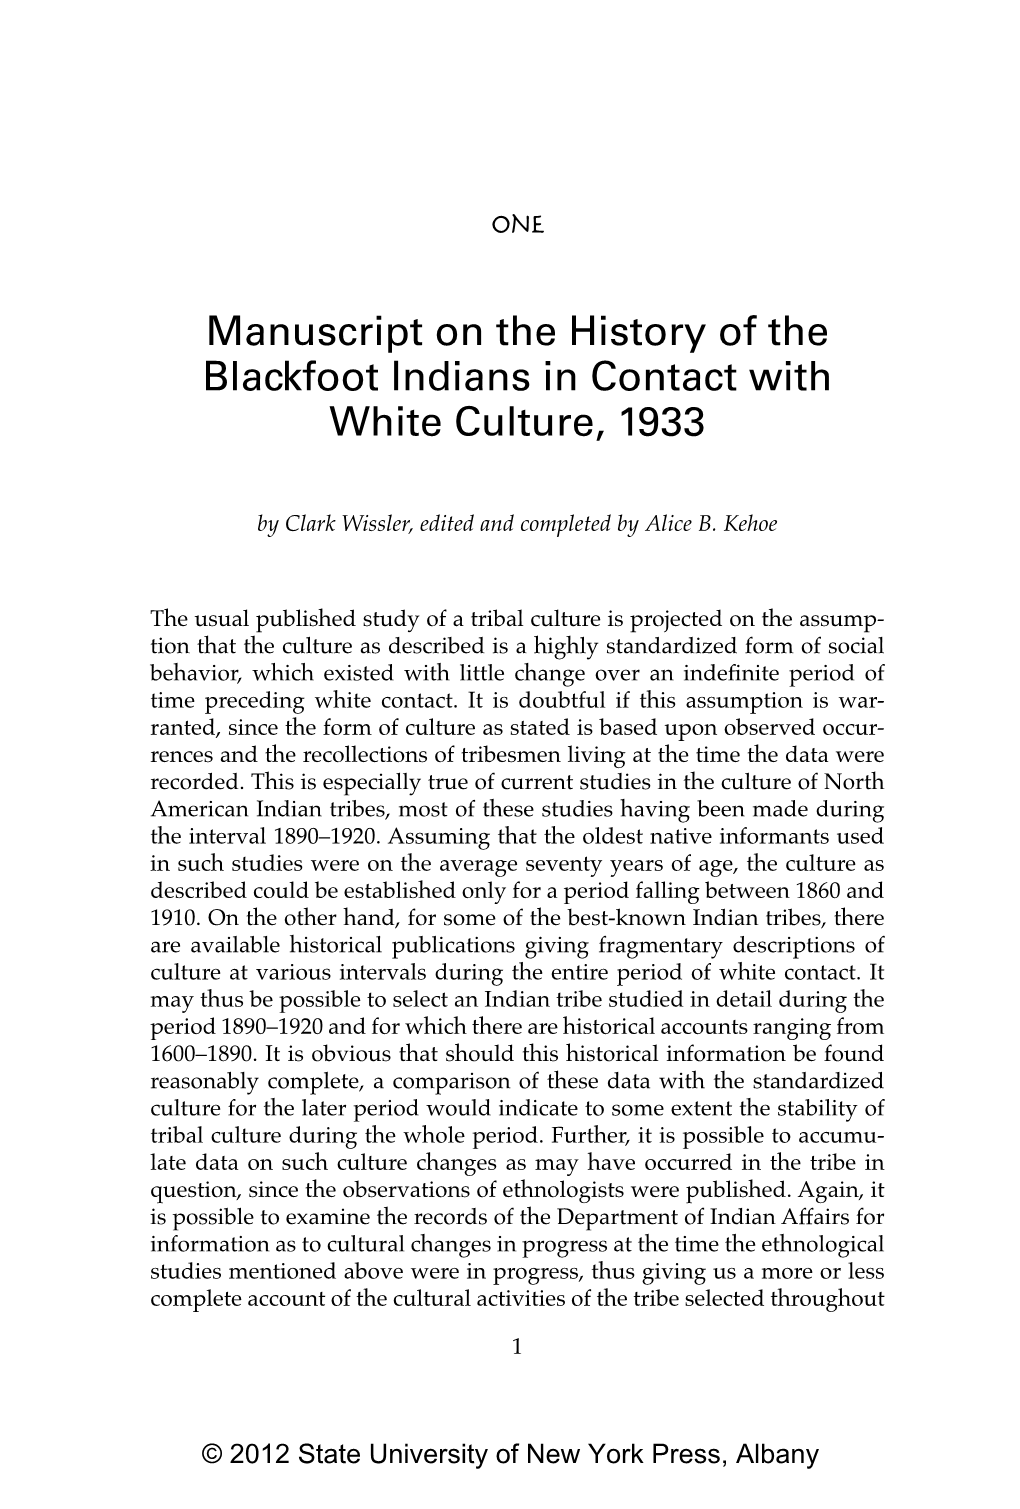 Manuscript on the History of the Blackfoot Indians in Contact with White Culture, 1933